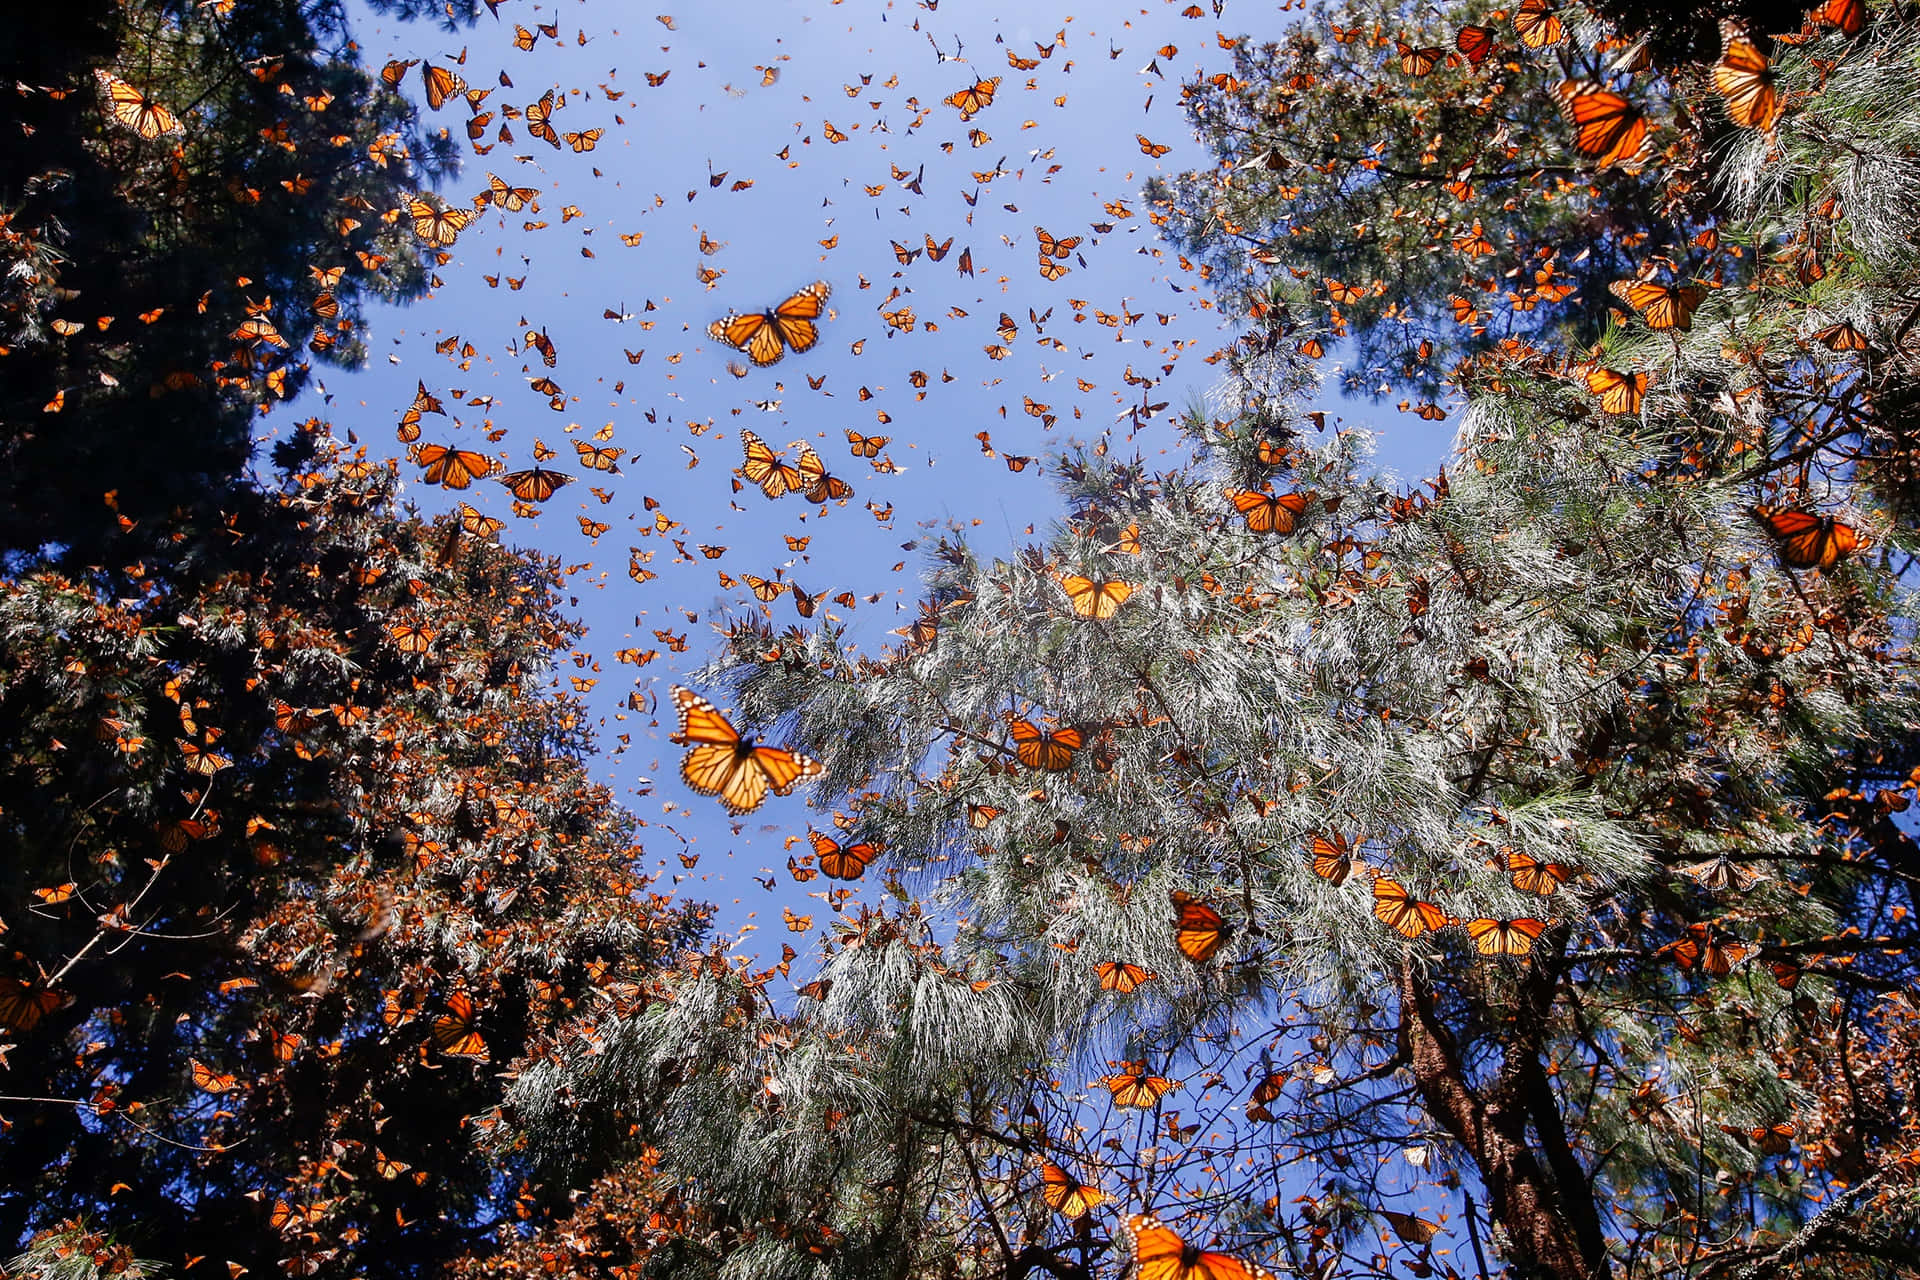 A beautiful view of butterfly migration in nature Wallpaper